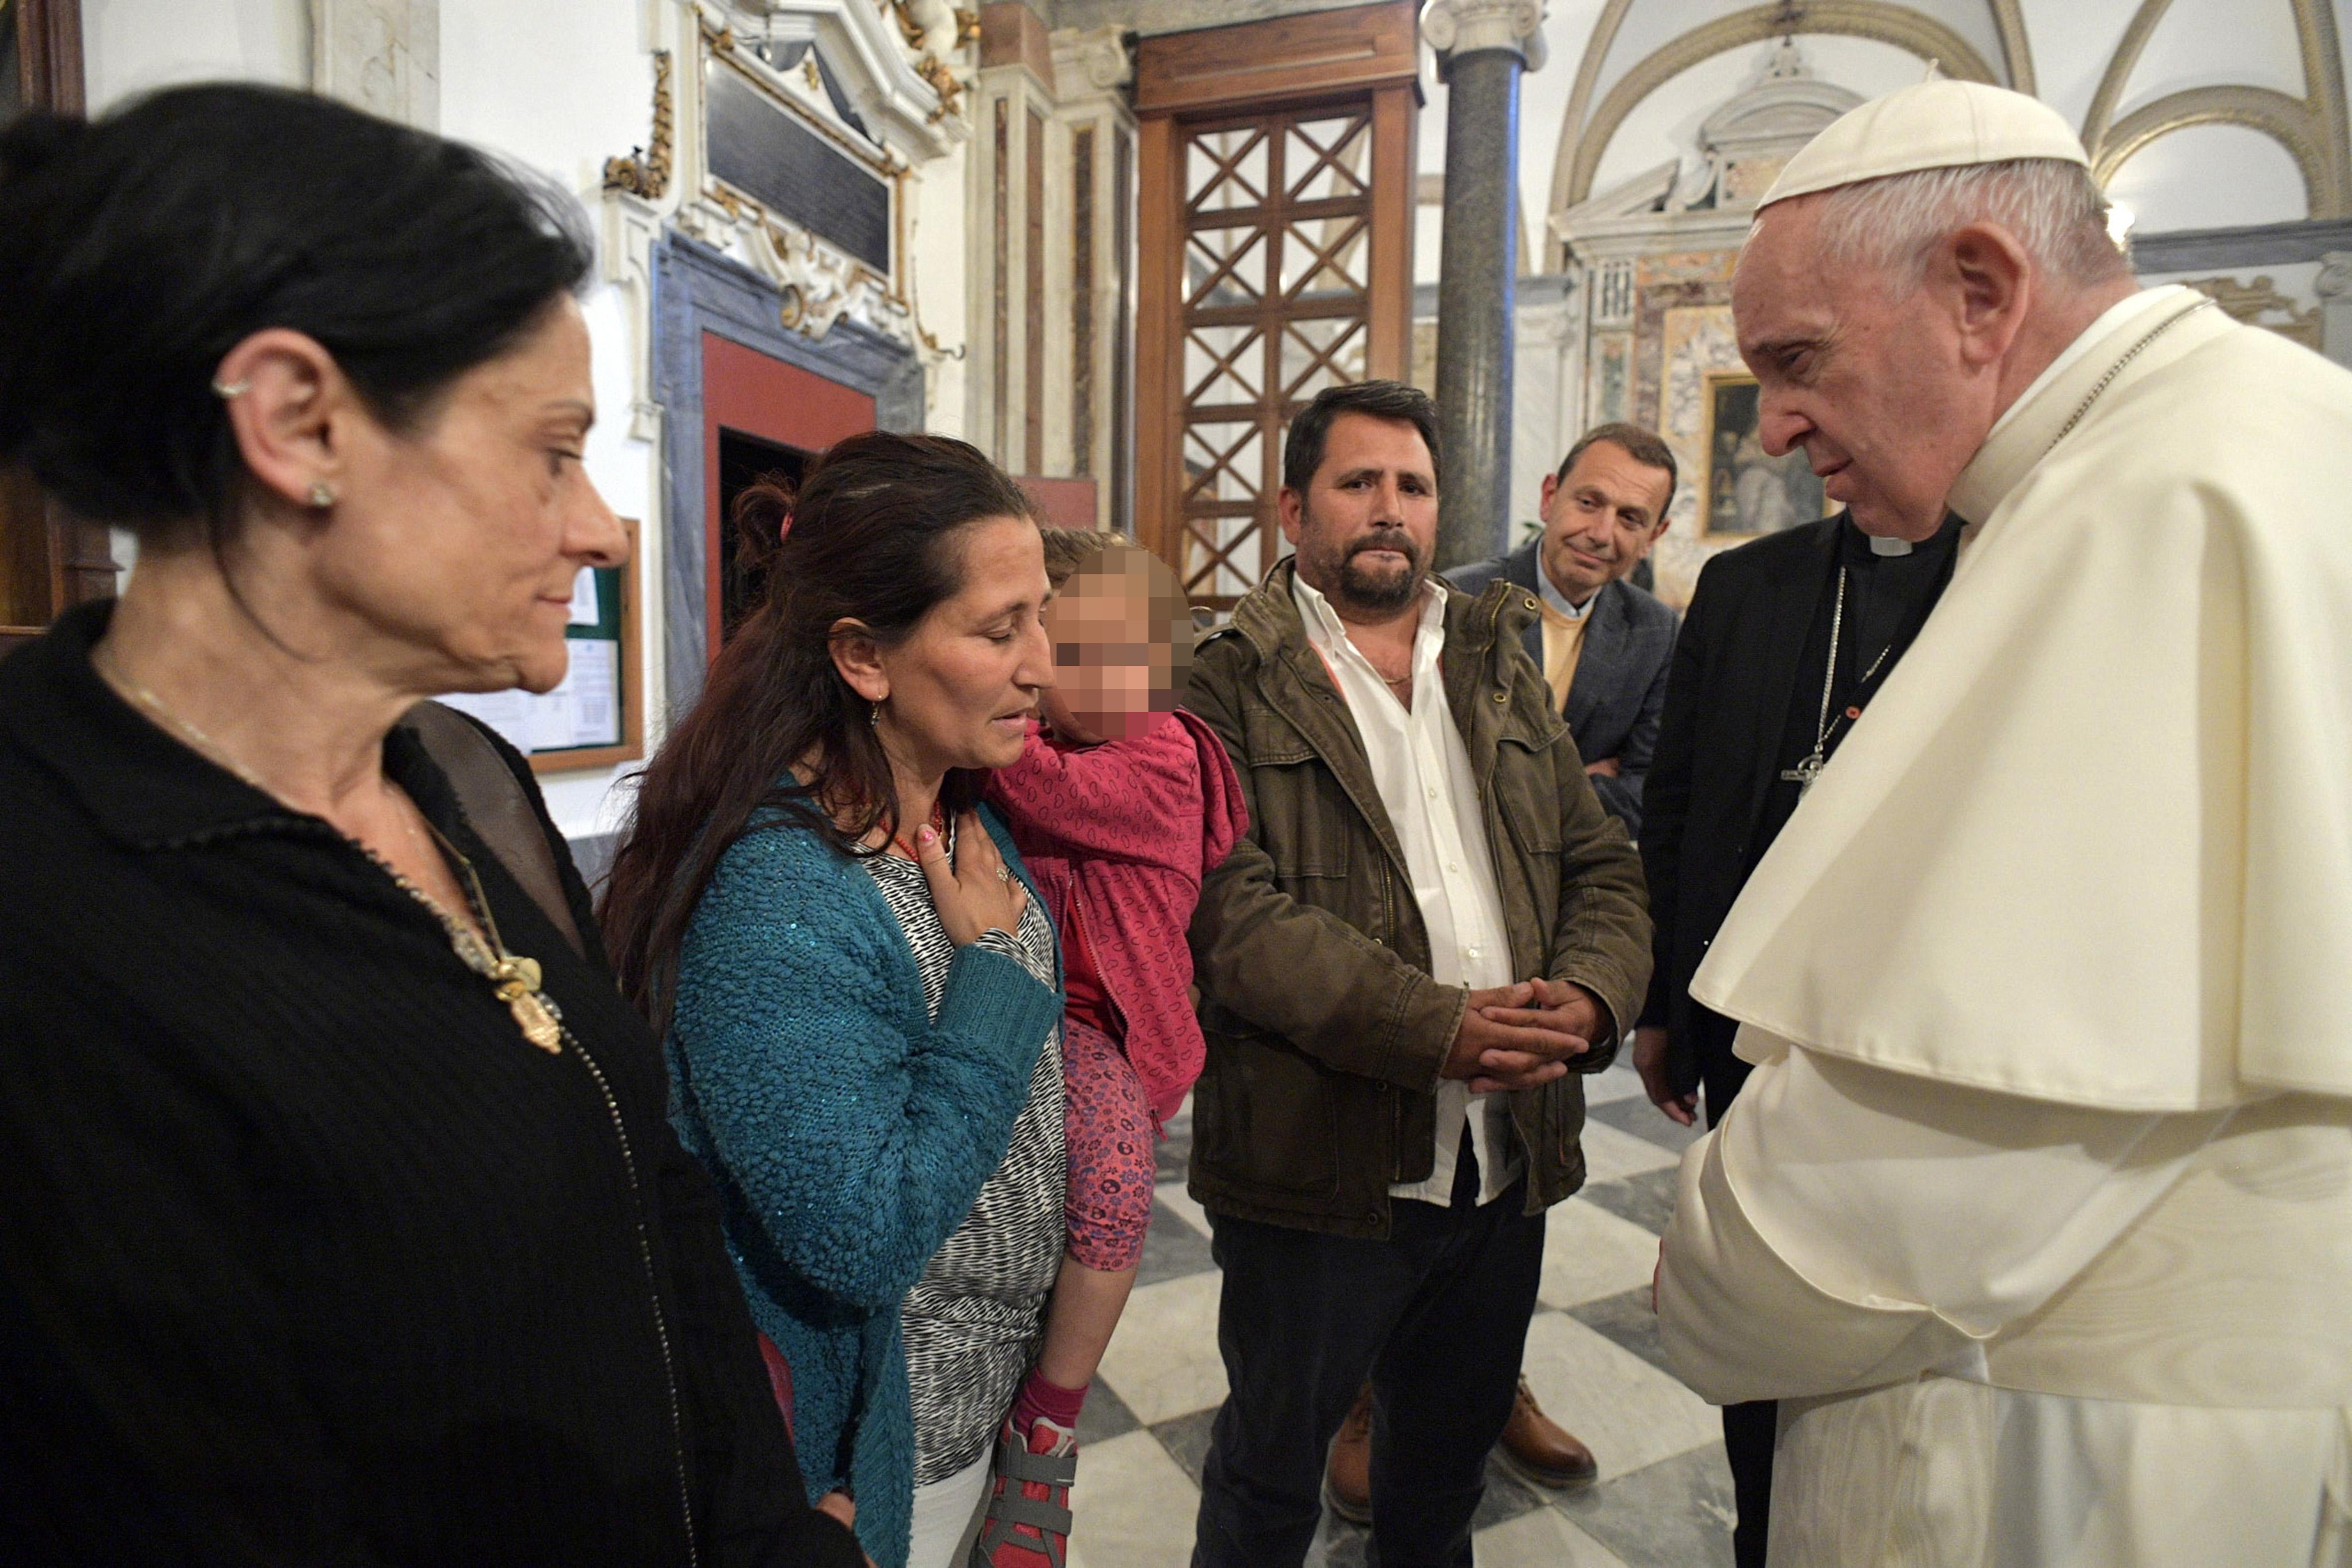 epa07559016 A handout picture provided by the Vatican Media shows a Roma family during the private audience with Pope Francis at the Basilica di San Giovanni in Laterano in Rome, Italy 09 May 2019. Pope Francis expressed dismay at the plight of Roma people during an audience with members of the ethnic minority.  EPA/VATICAN MEDIA HANDOUT ATTENTION EDITORS: CHILDS FACE PIXELATED DUE TO ITALIAN LAW HANDOUT EDITORIAL USE ONLY/NO SALES